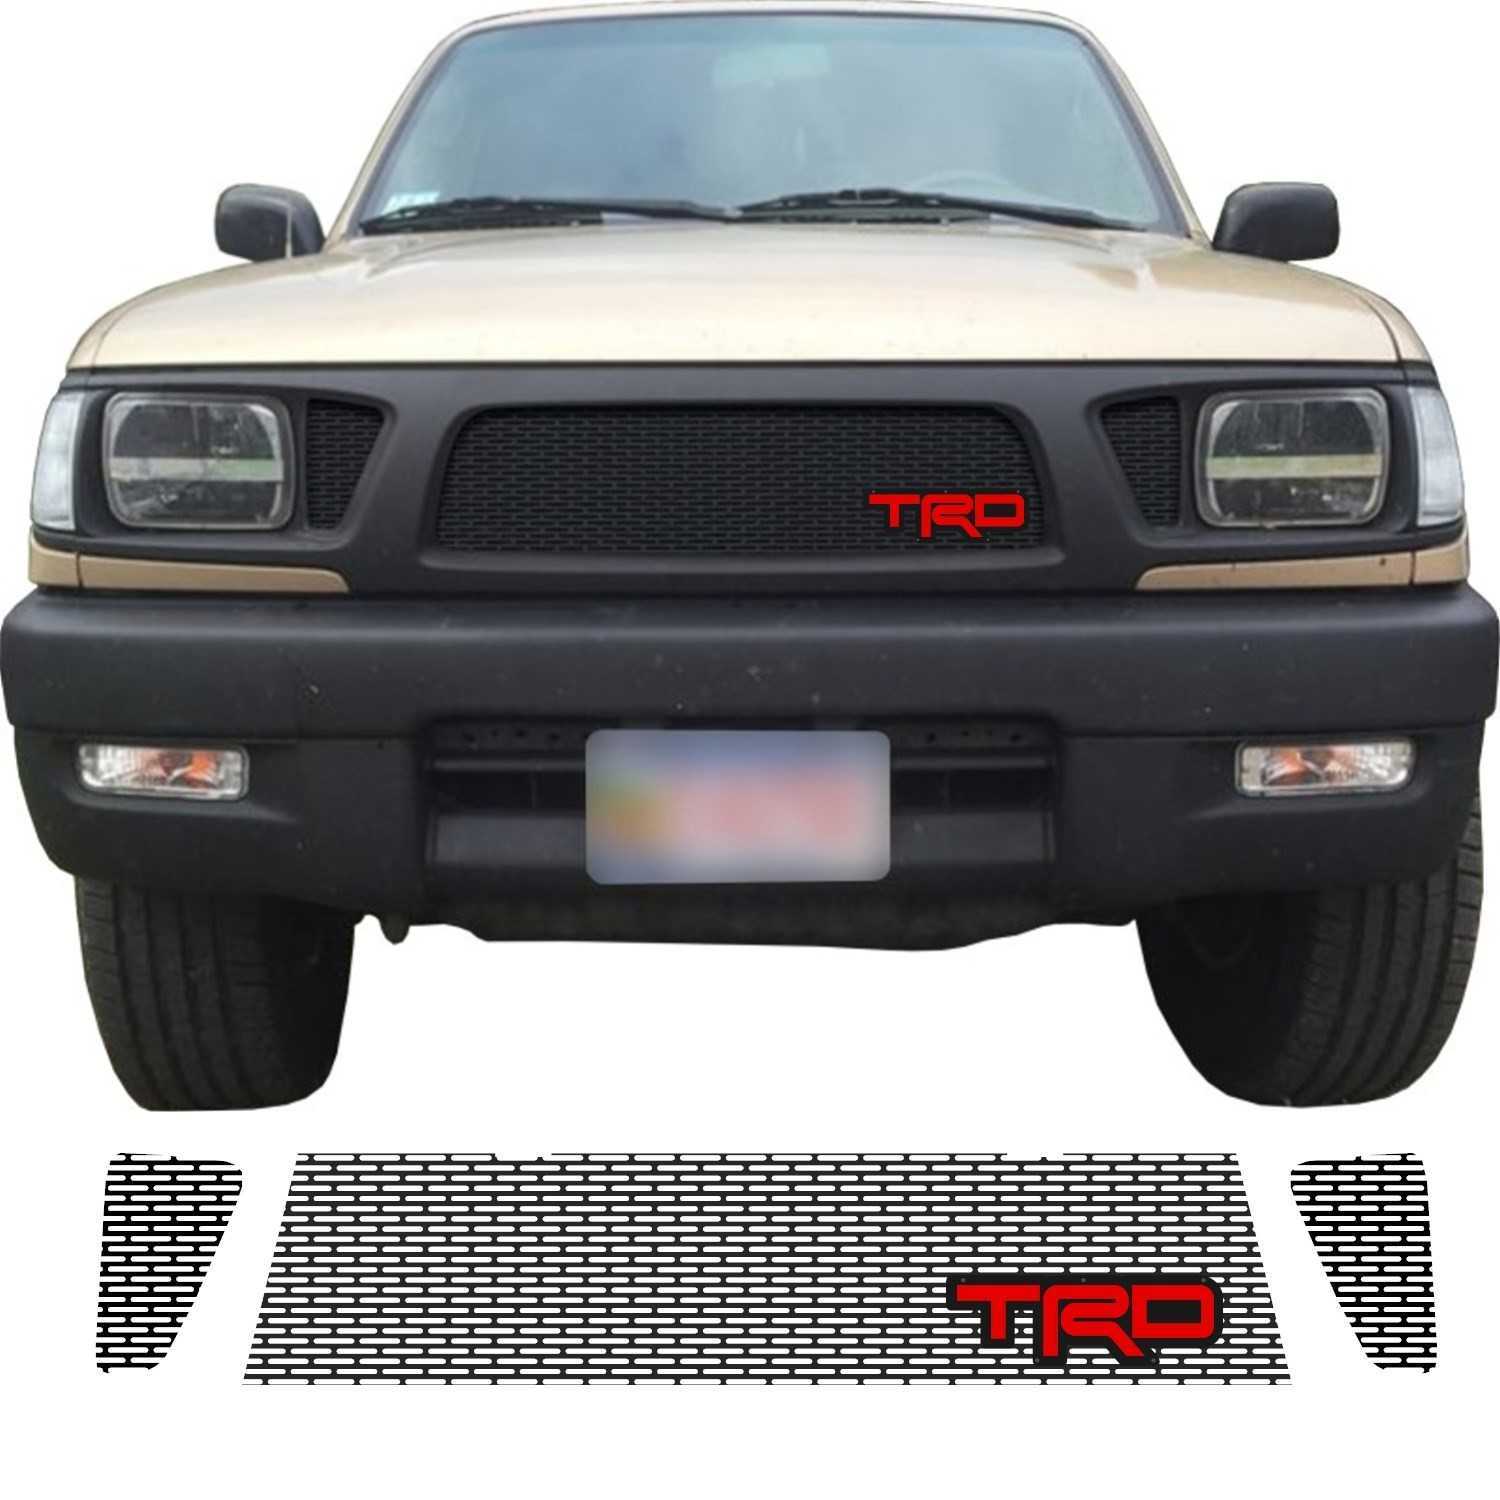 1995 - 1997 Toyota Tacoma Grill Mesh With TRD Emblem